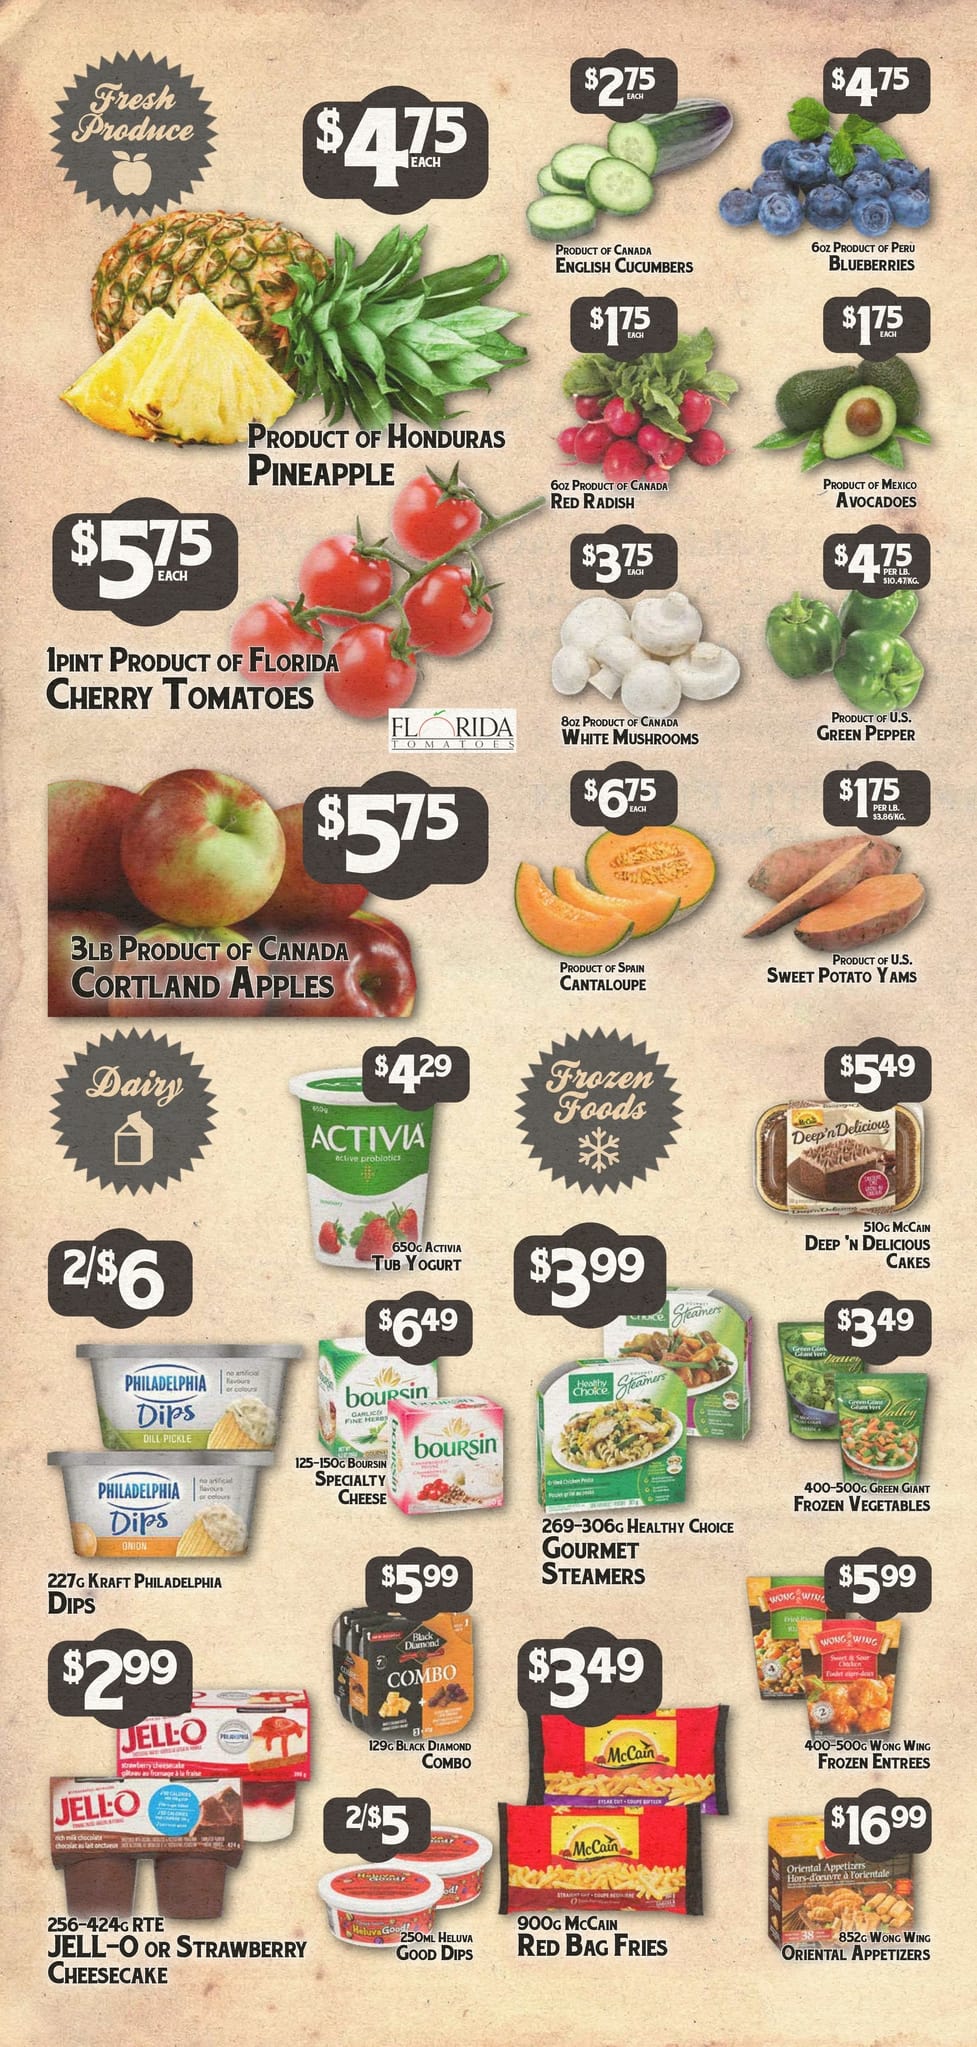 Powell's Supermarket - Weekly Flyer Specials - Page 3